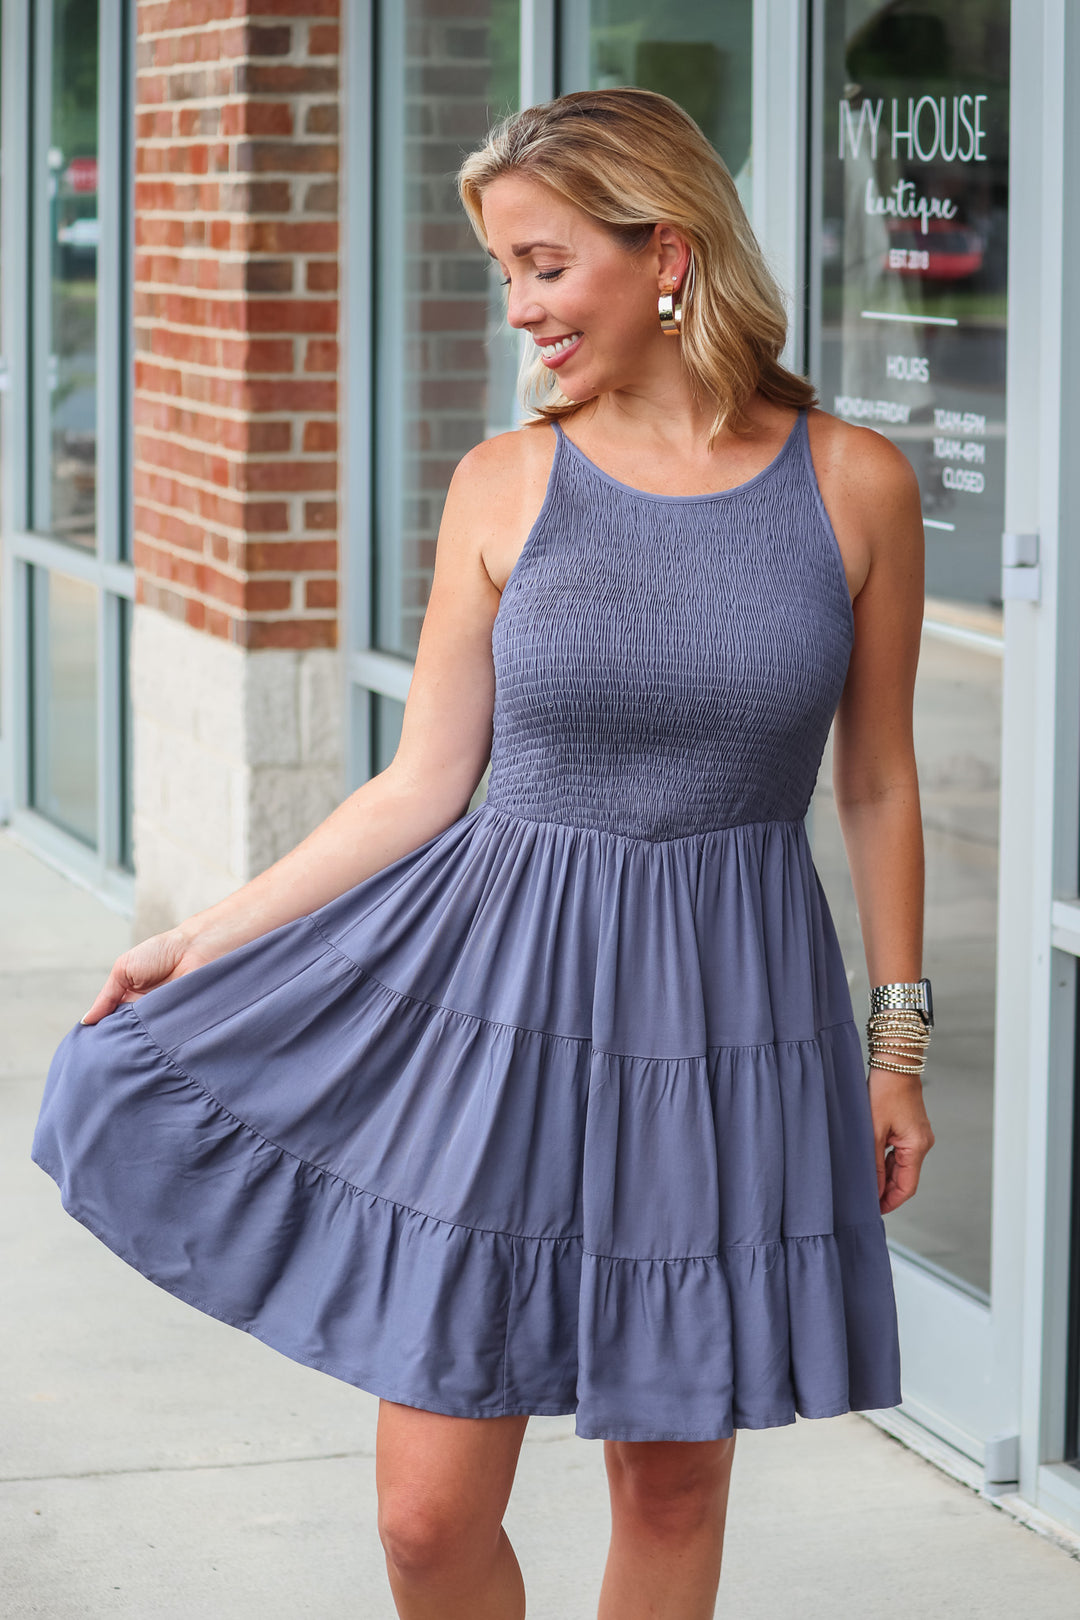 A blonde woman wearing a navy blue dress with a smocked top and tiered skirt. She is standing in front of a shop.